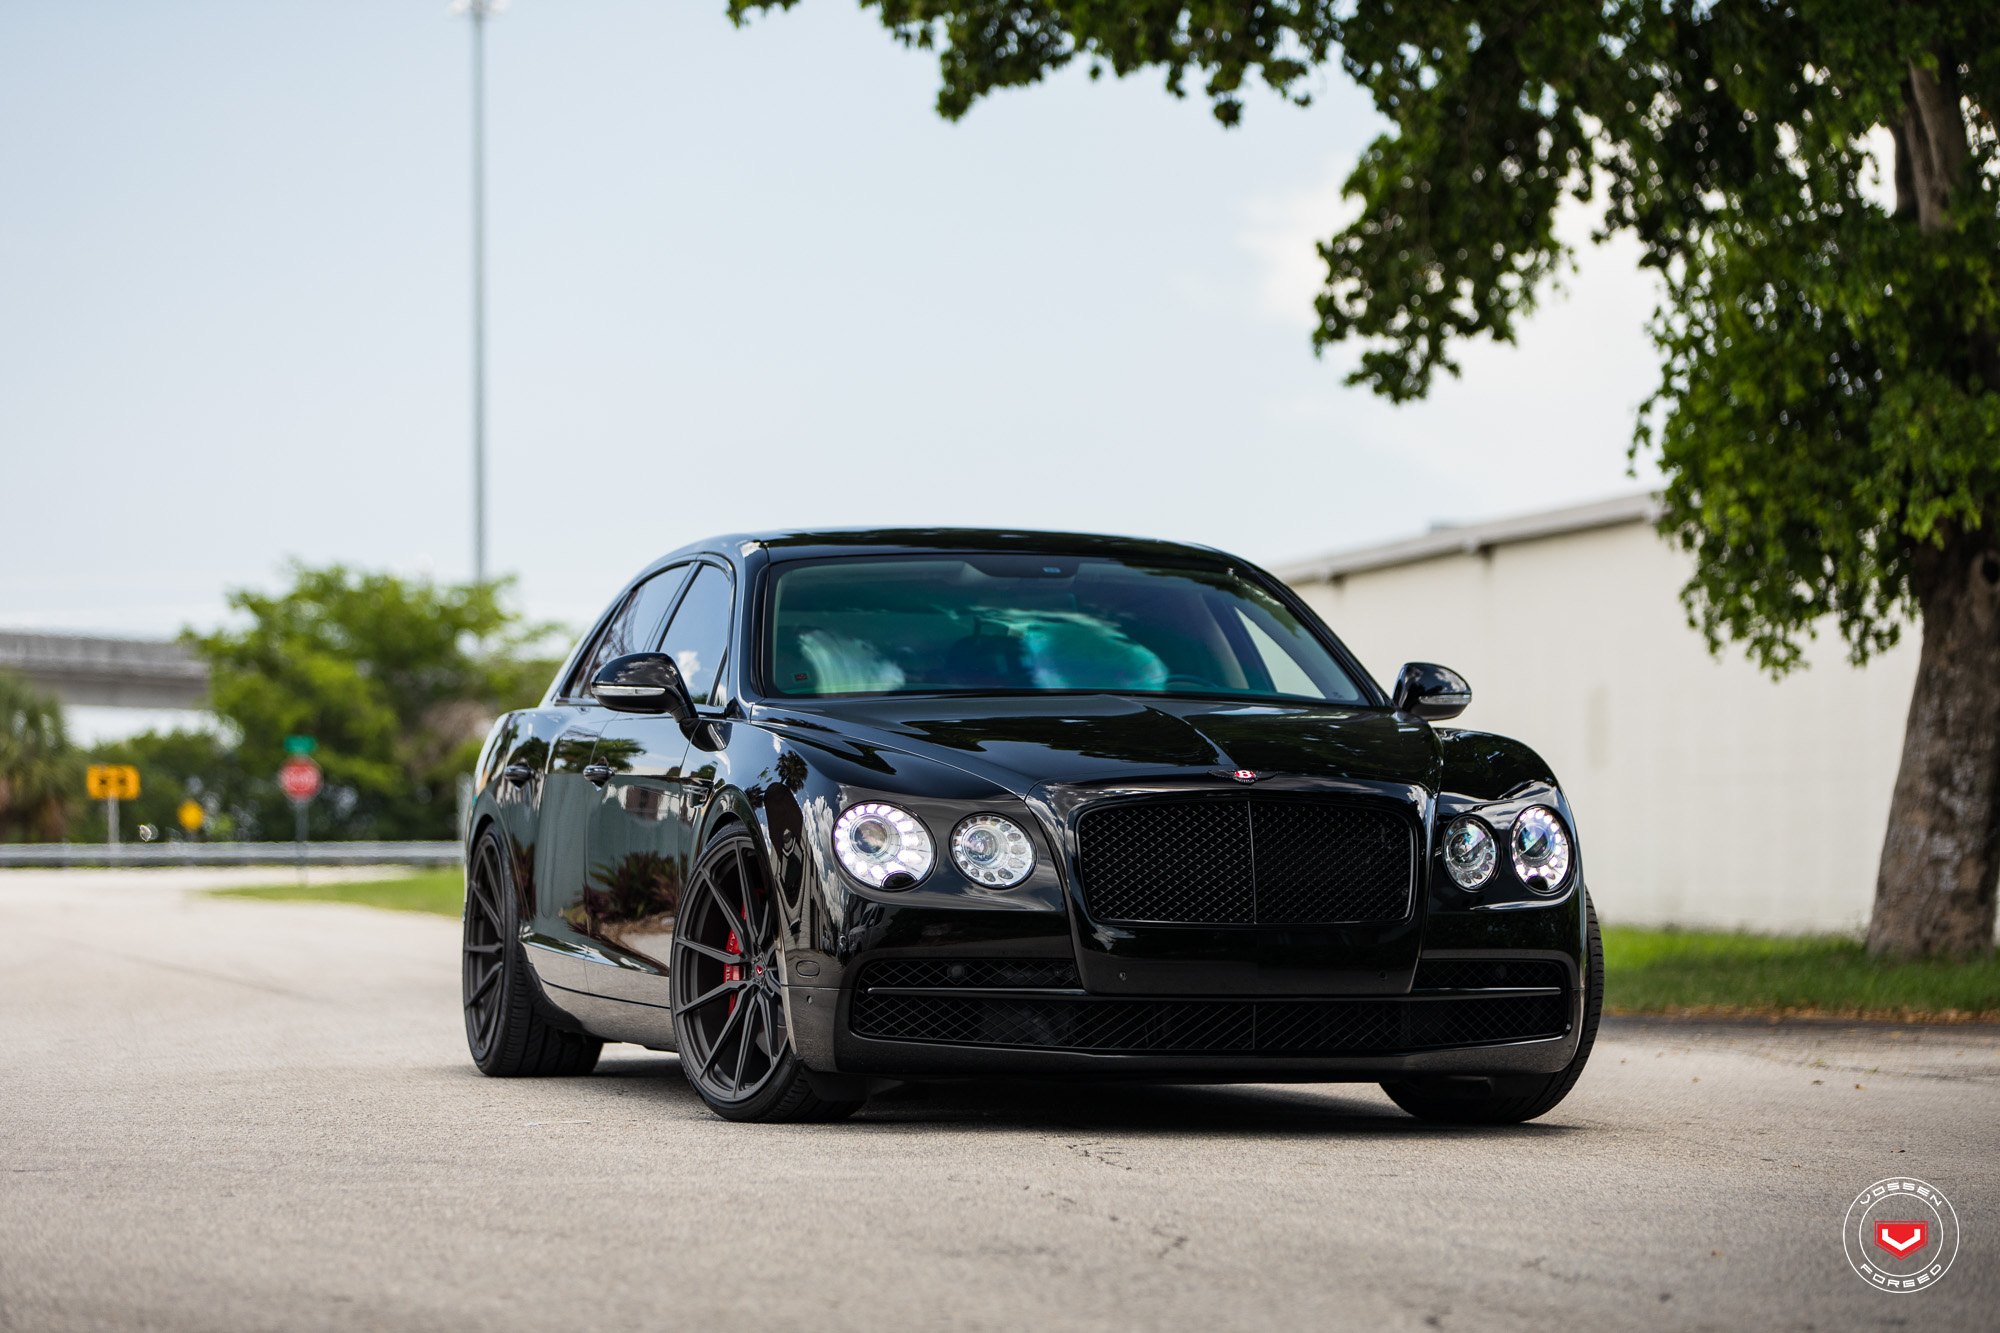 Blacked Out Mesh Grille on Bentley Flying-Spur - Photo by Vossen